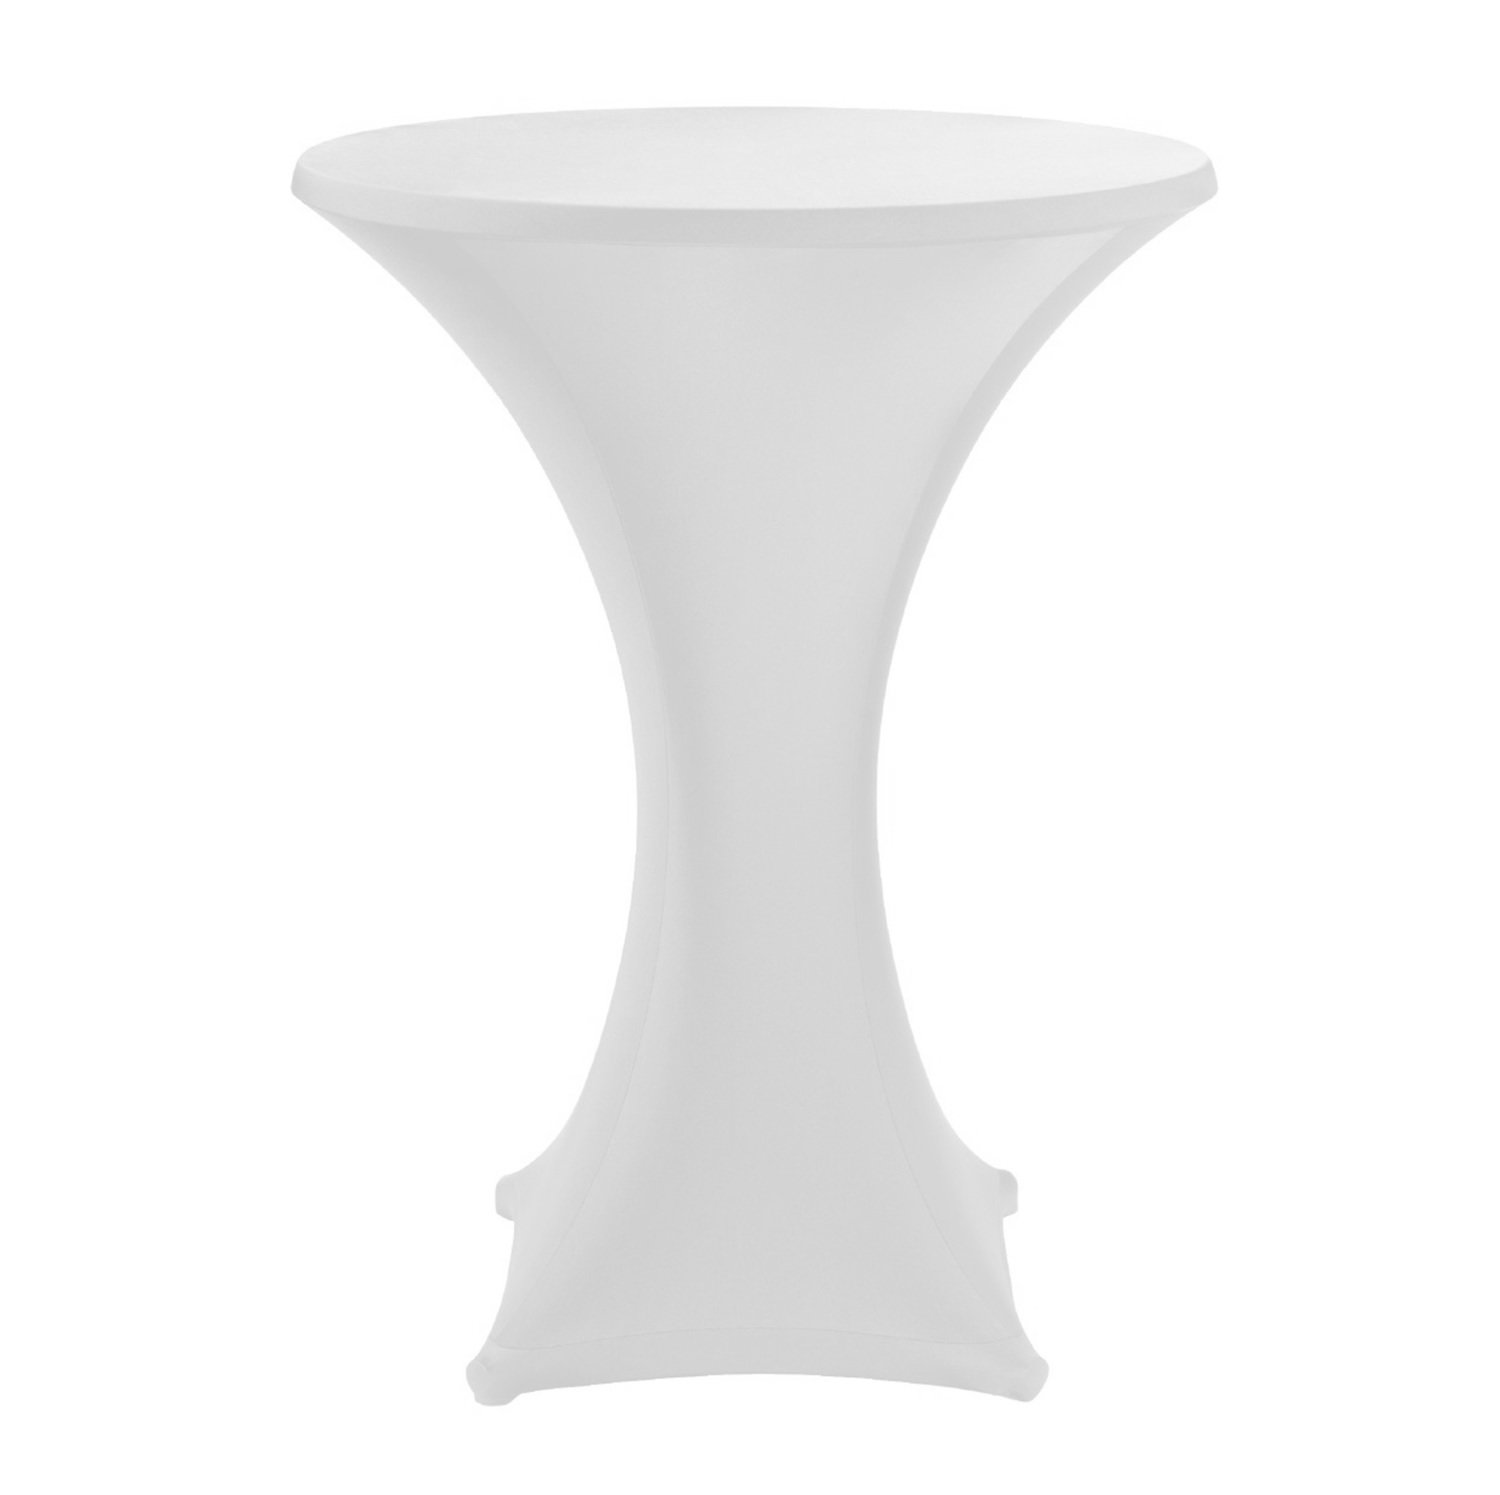 Stretch Poseur Table Cover White